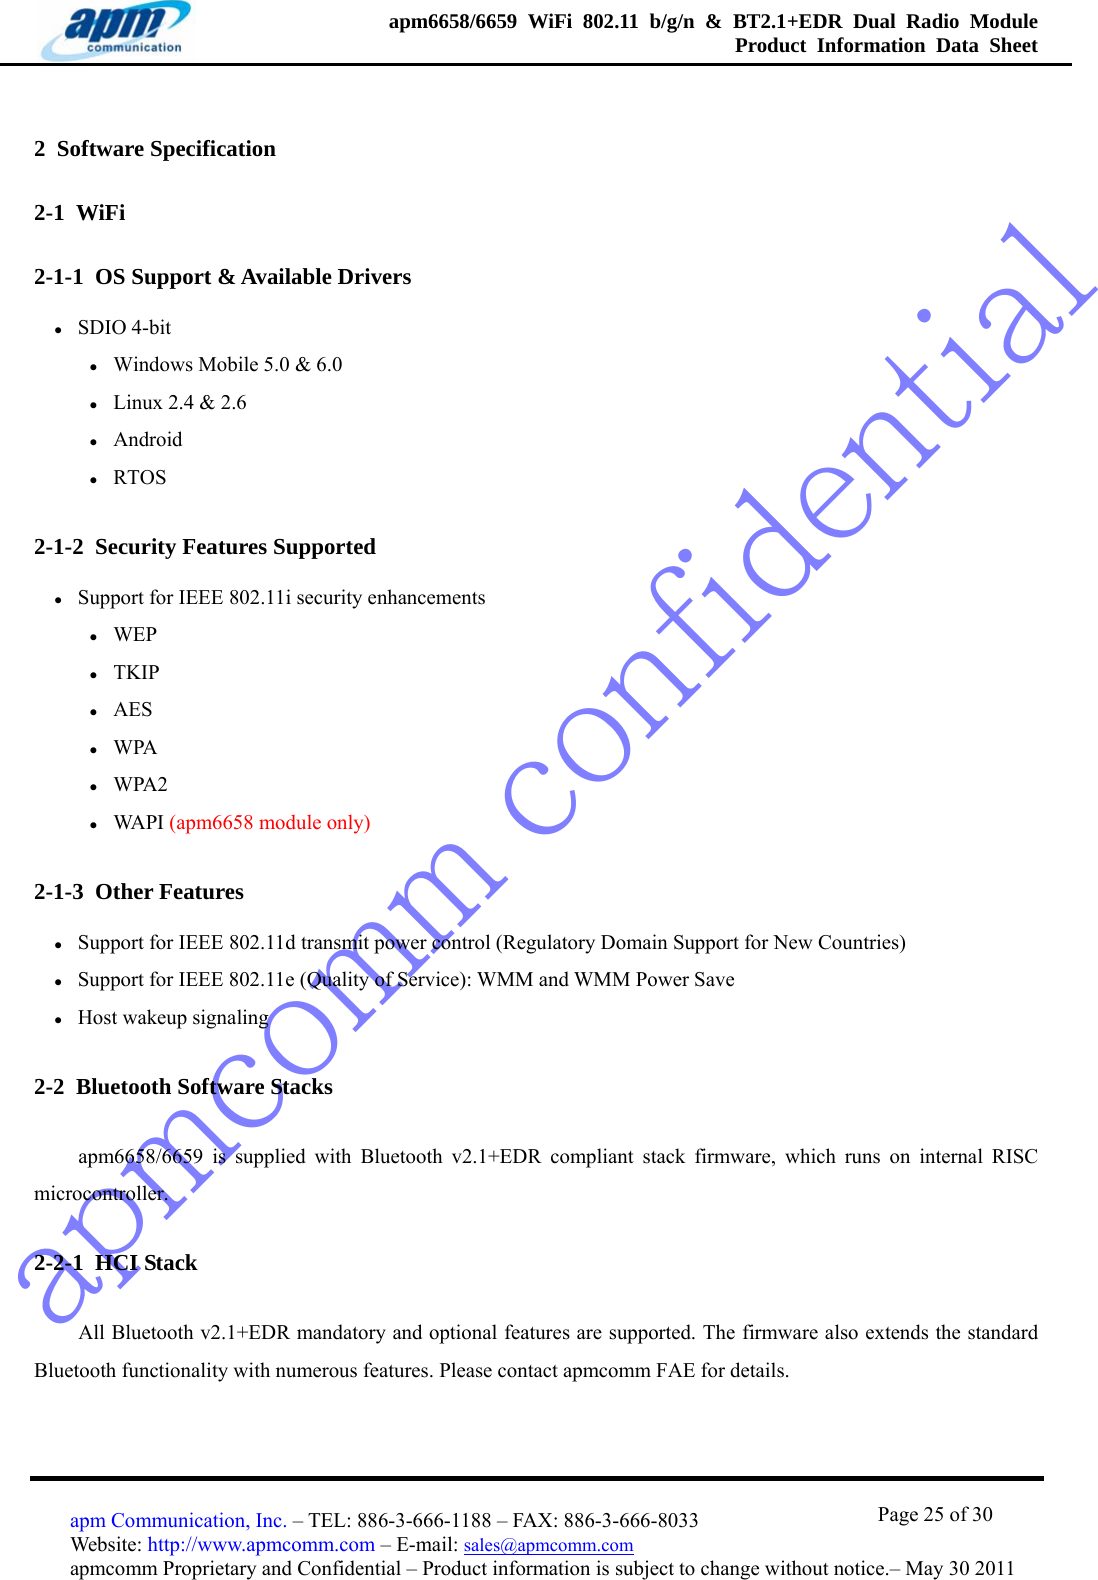 apmcomm confidentialapm6658/6659 WiFi 802.11 b/g/n &amp; BT2.1+EDR Dual Radio Module  Product Information Data Sheet                                       Page 25 of 30 apm Communication, Inc. – TEL: 886-3-666-1188 – FAX: 886-3-666-8033 Website: http://www.apmcomm.com – E-mail: sales@apmcomm.com  apmcomm Proprietary and Confidential – Product information is subject to change without notice.– May 30 2011 2  Software Specification 2-1  WiFi 2-1-1  OS Support &amp; Available Drivers z SDIO 4-bit z Windows Mobile 5.0 &amp; 6.0 z Linux 2.4 &amp; 2.6 z Android z RTOS 2-1-2  Security Features Supported z Support for IEEE 802.11i security enhancements z WEP z TKIP z AES z WPA z WPA2 z WA P I  (apm6658 module only) 2-1-3  Other Features z Support for IEEE 802.11d transmit power control (Regulatory Domain Support for New Countries) z Support for IEEE 802.11e (Quality of Service): WMM and WMM Power Save z Host wakeup signaling 2-2  Bluetooth Software Stacks apm6658/6659 is supplied with Bluetooth v2.1+EDR compliant stack firmware, which runs on internal RISC microcontroller.   2-2-1  HCI Stack All Bluetooth v2.1+EDR mandatory and optional features are supported. The firmware also extends the standard Bluetooth functionality with numerous features. Please contact apmcomm FAE for details. 